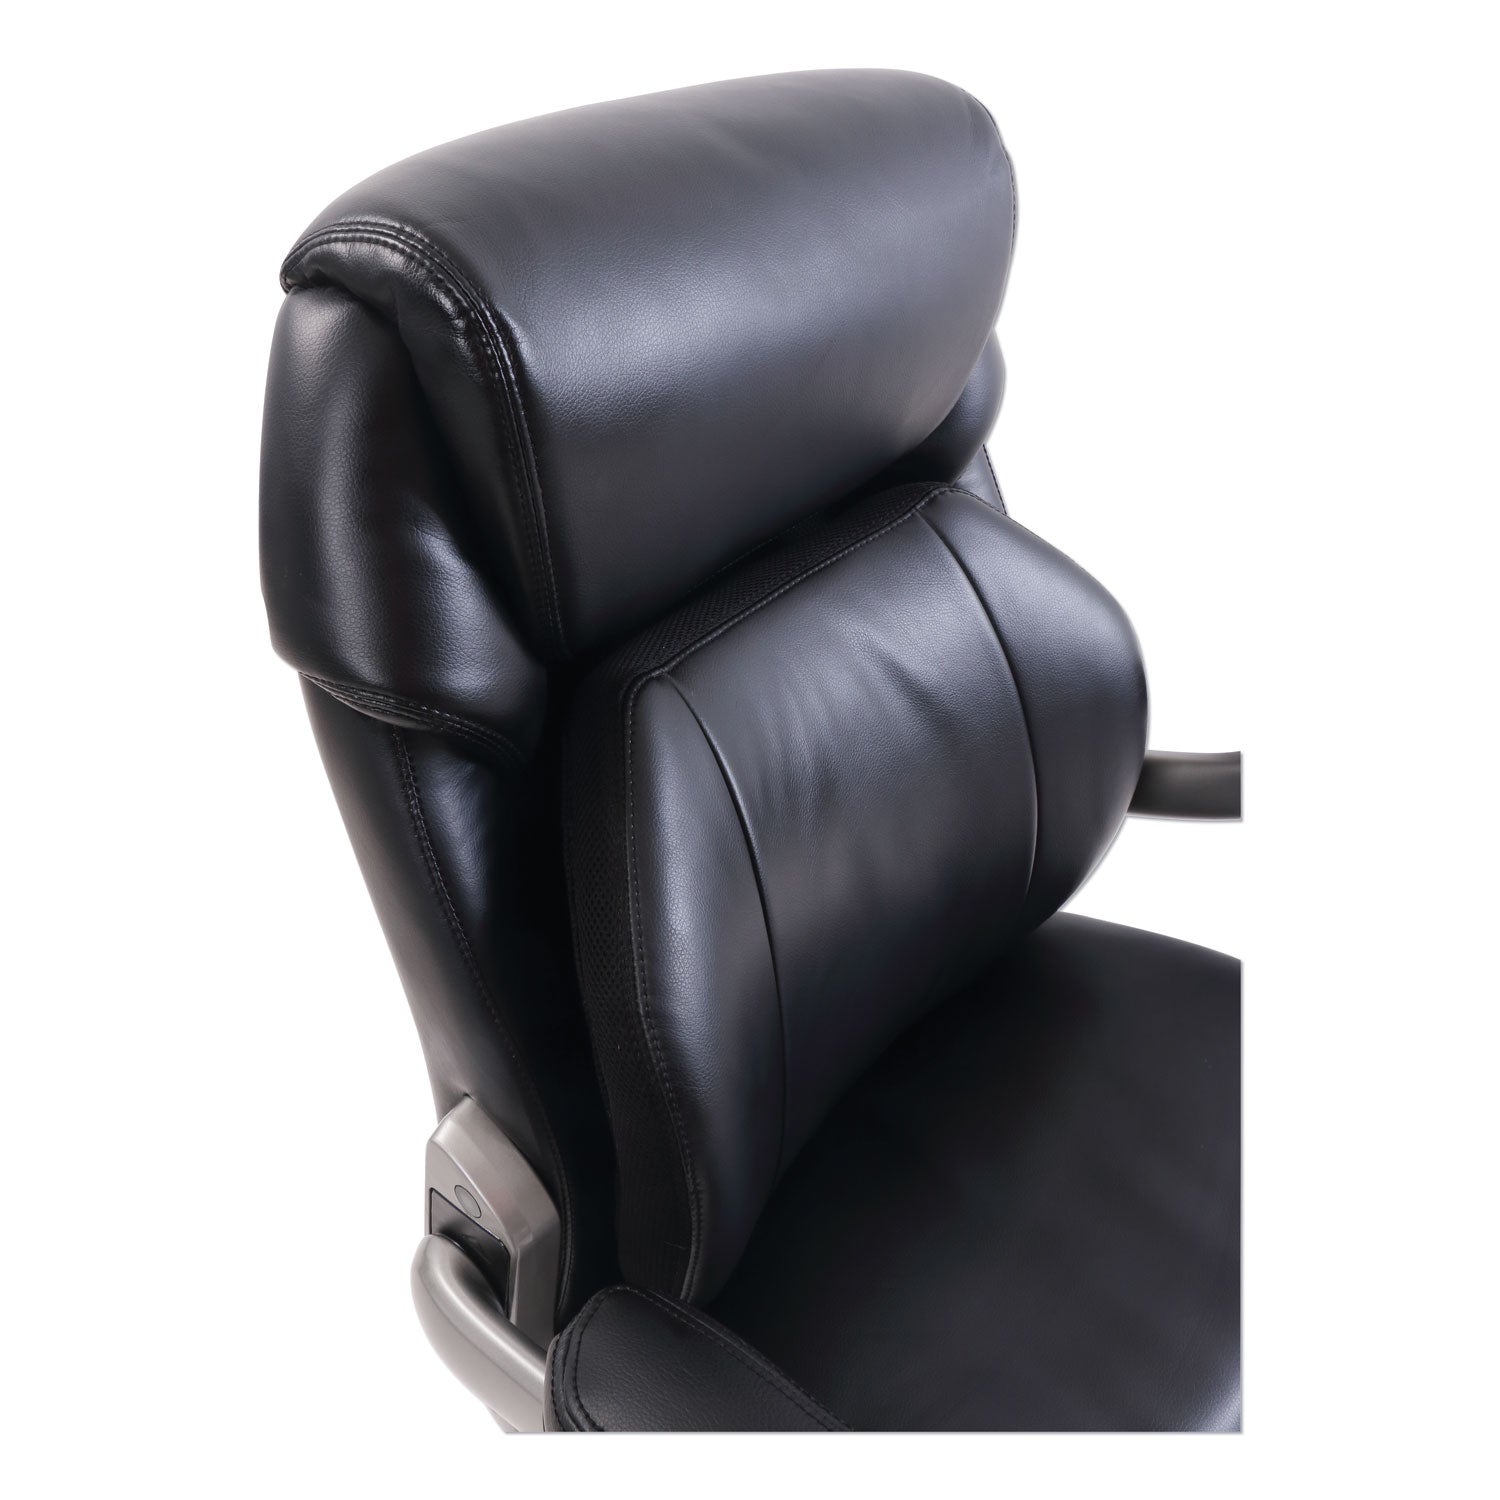 cosset-mid-back-executive-chair-supports-up-to-275-lb-185-to-215-seat-height-black-seat-back-slate-base_srj48966 - 3